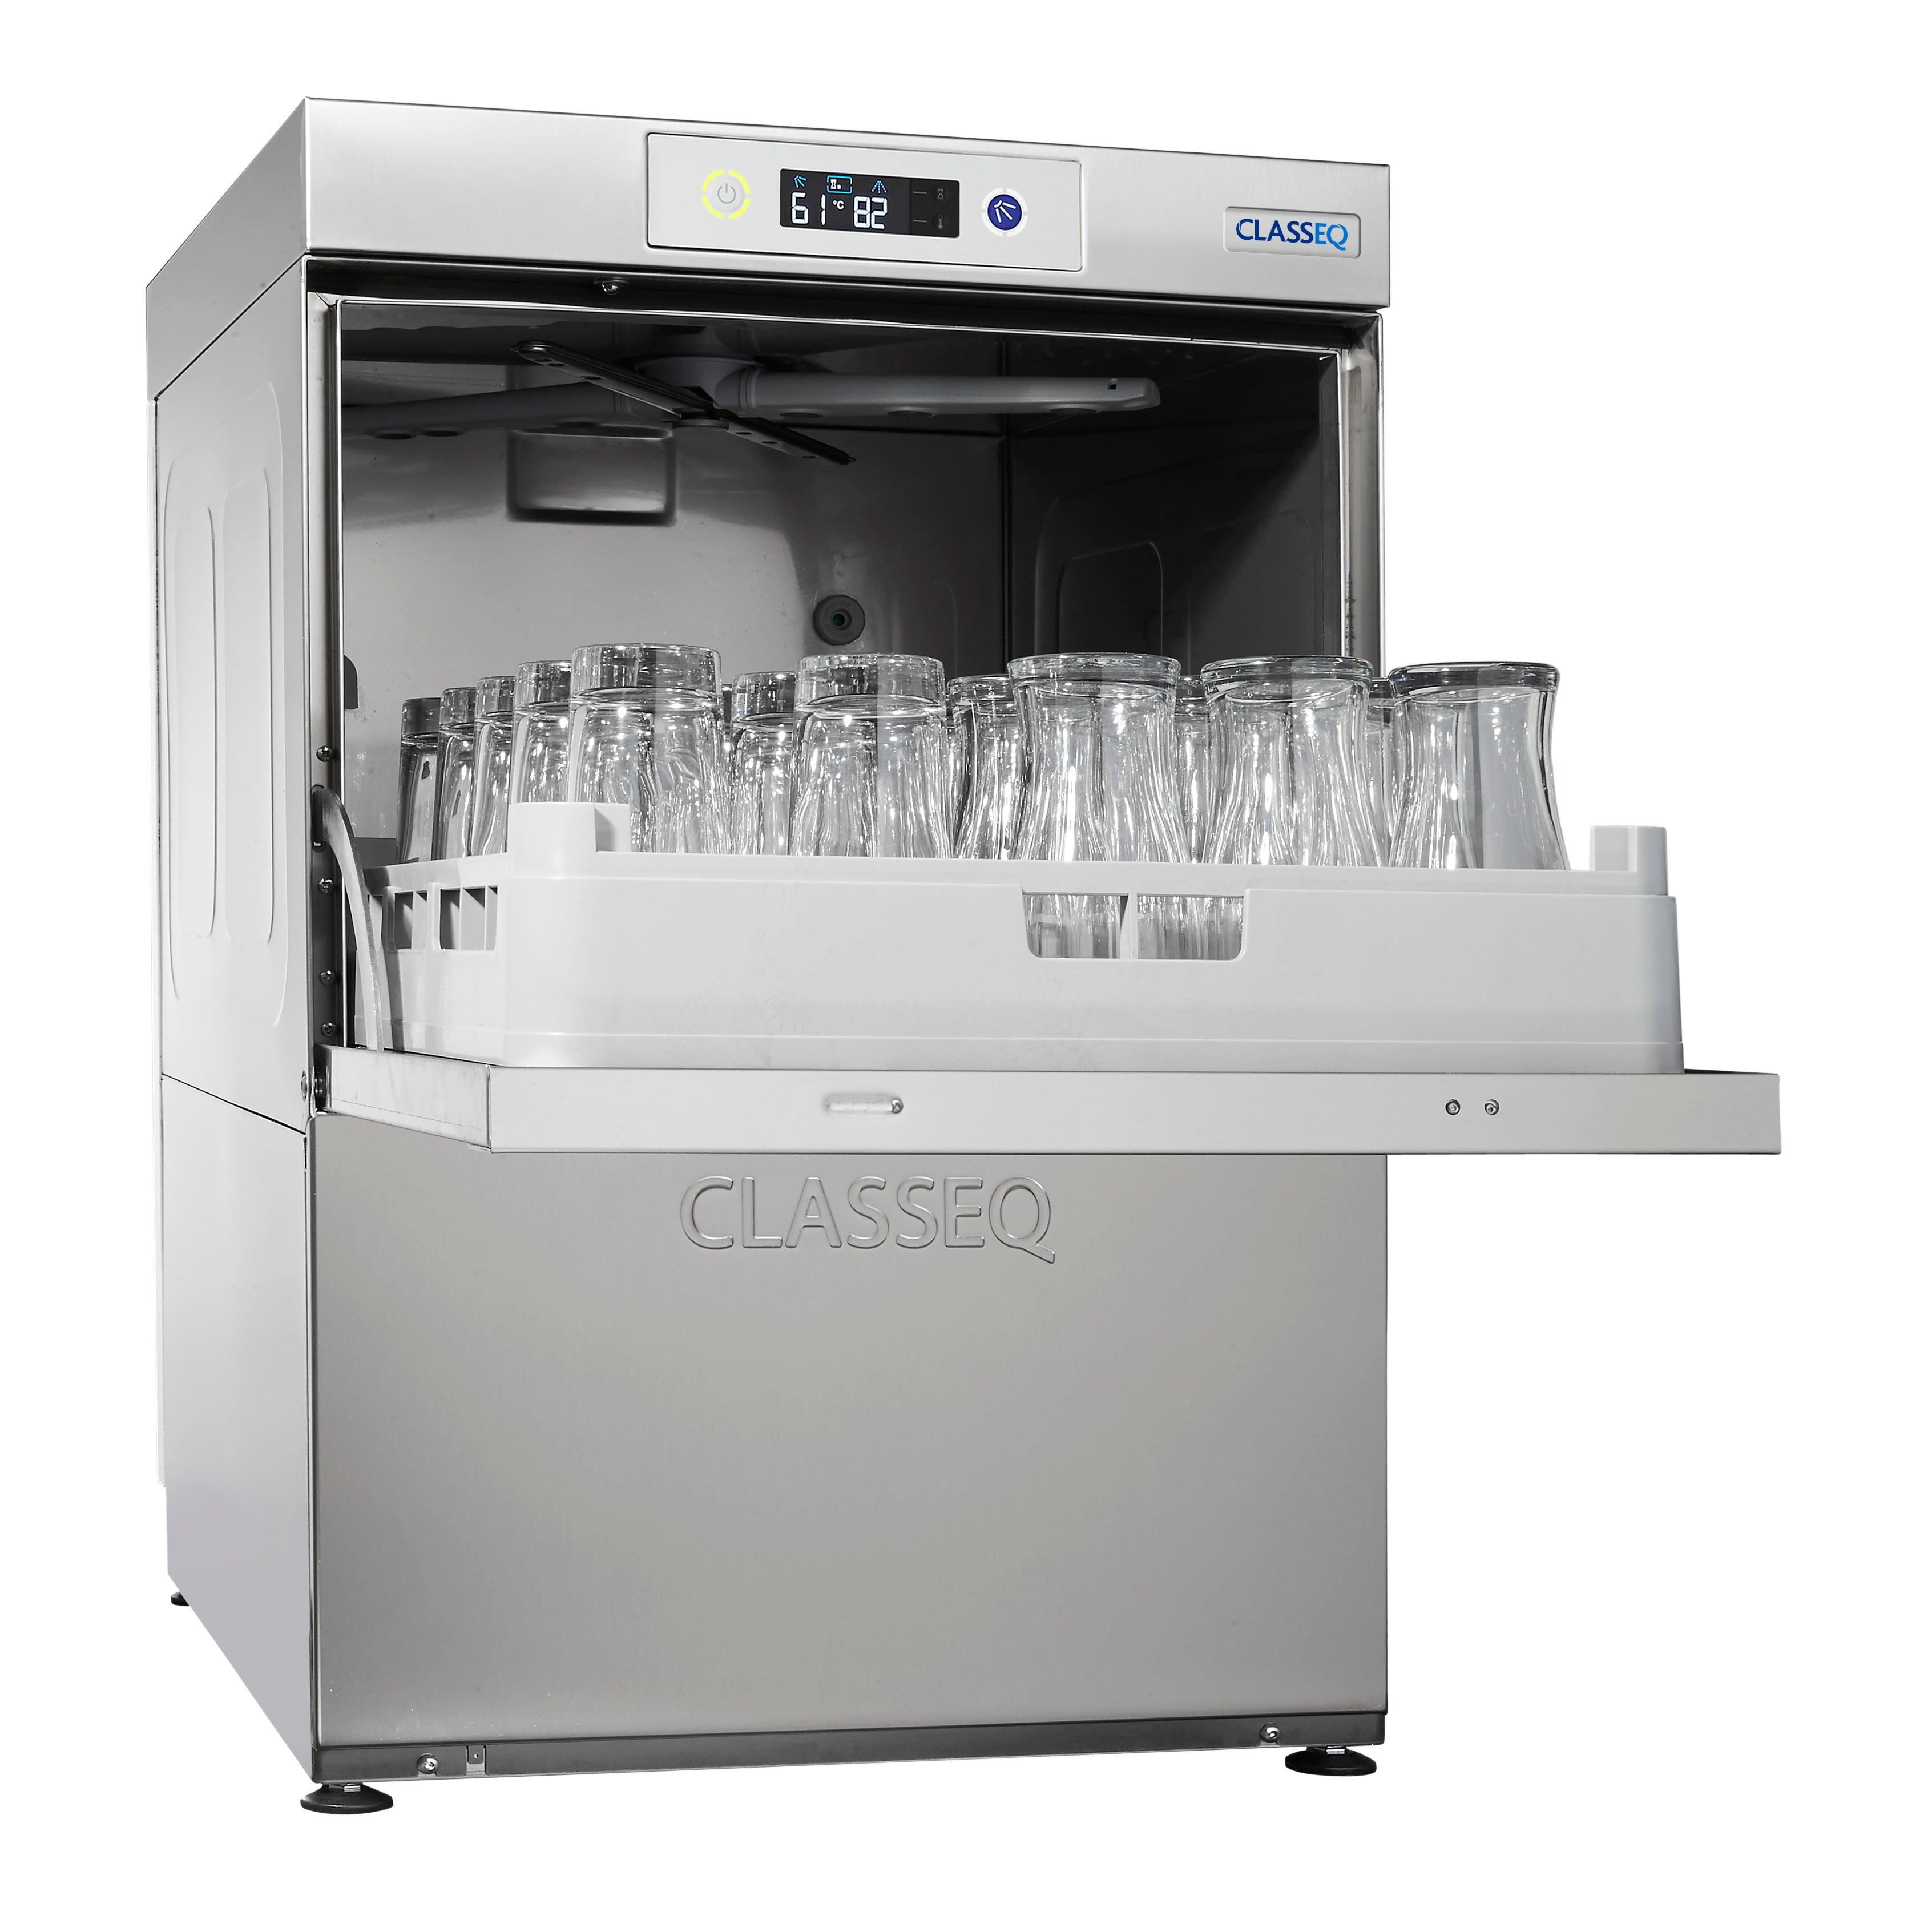 G500 Gravity Drain Classeq Glass Washer - Clear Cool